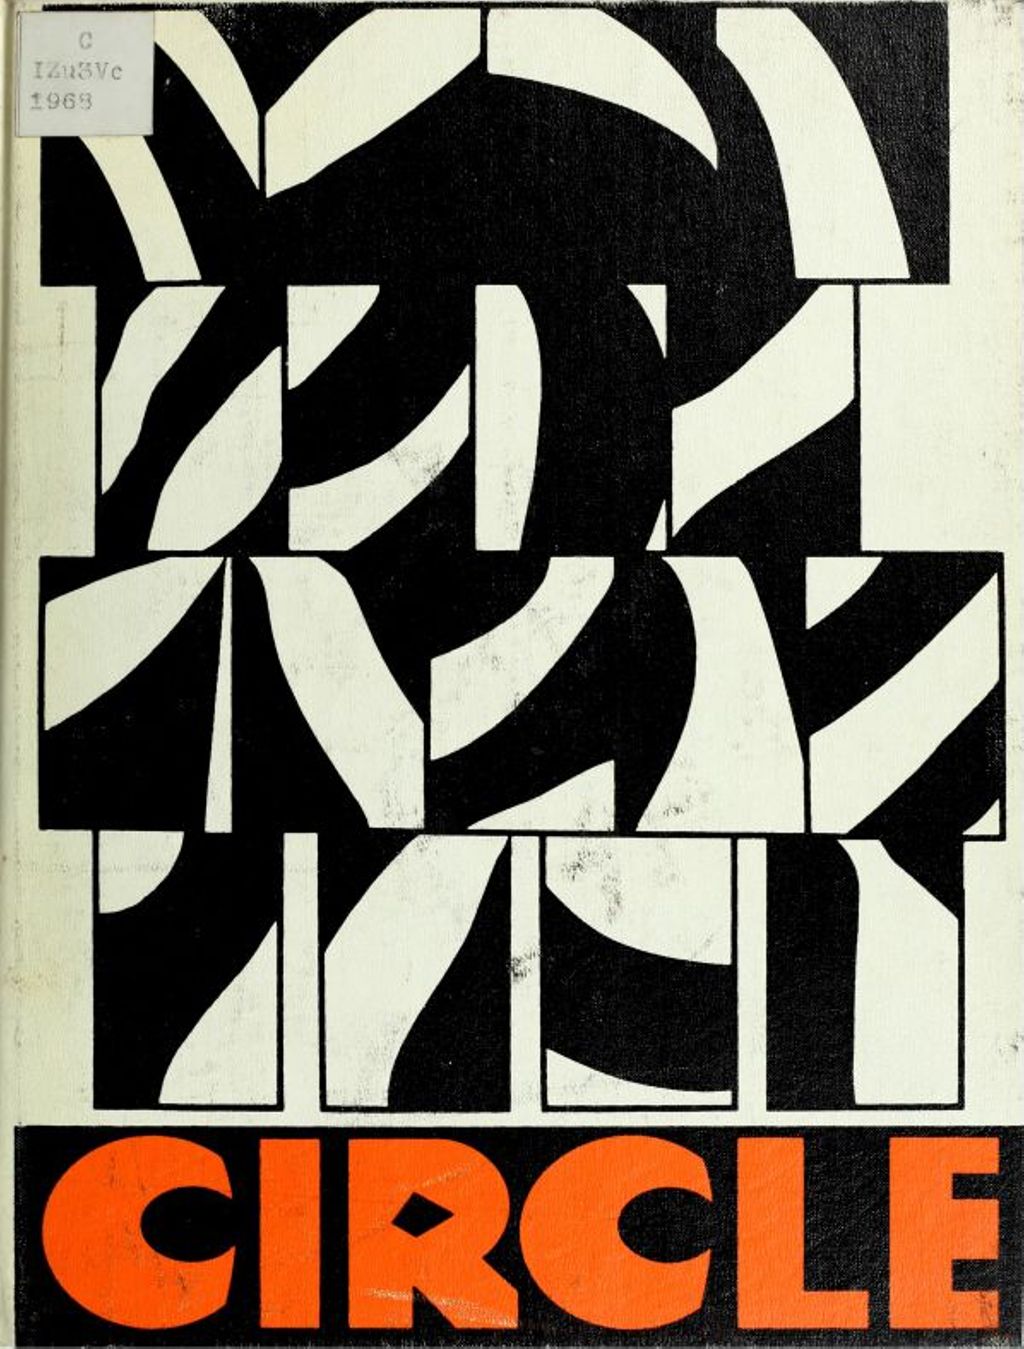 Miniature of The Circle Yearbook 1968